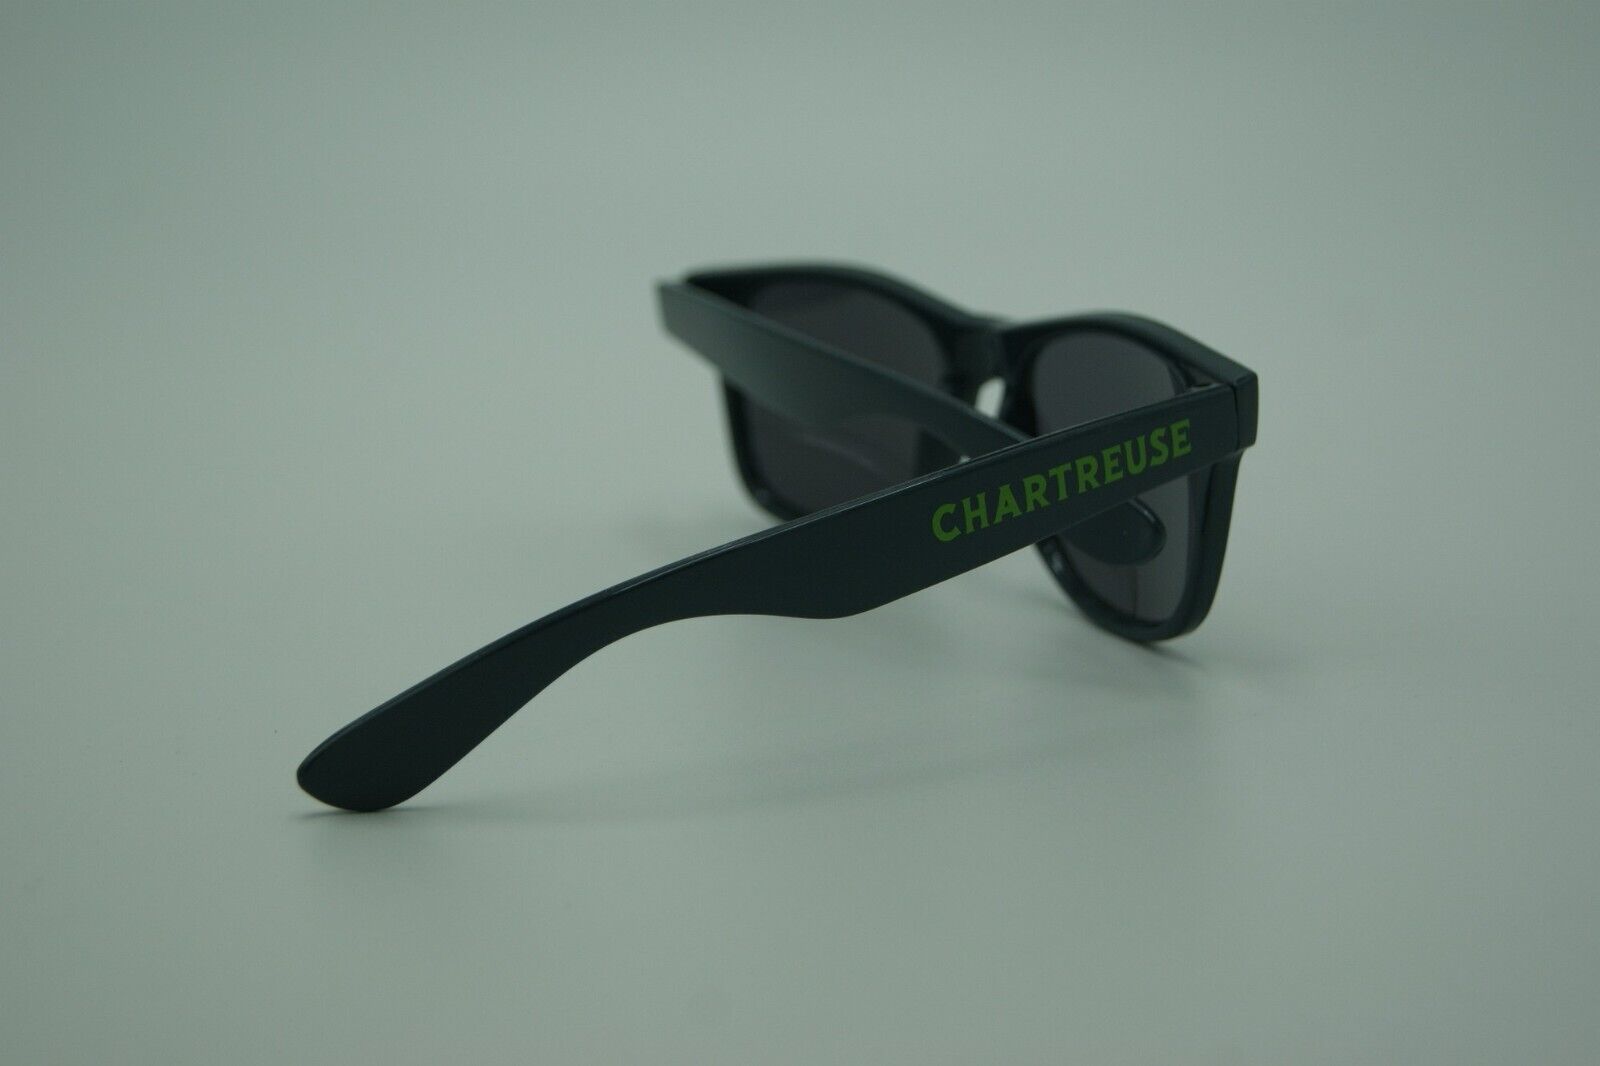 CHARTREUSE VERTE HERBAL LIQUOR 1 SUNGLASSES GOODIES COLLECTOR BRAND NEW FRANCE #